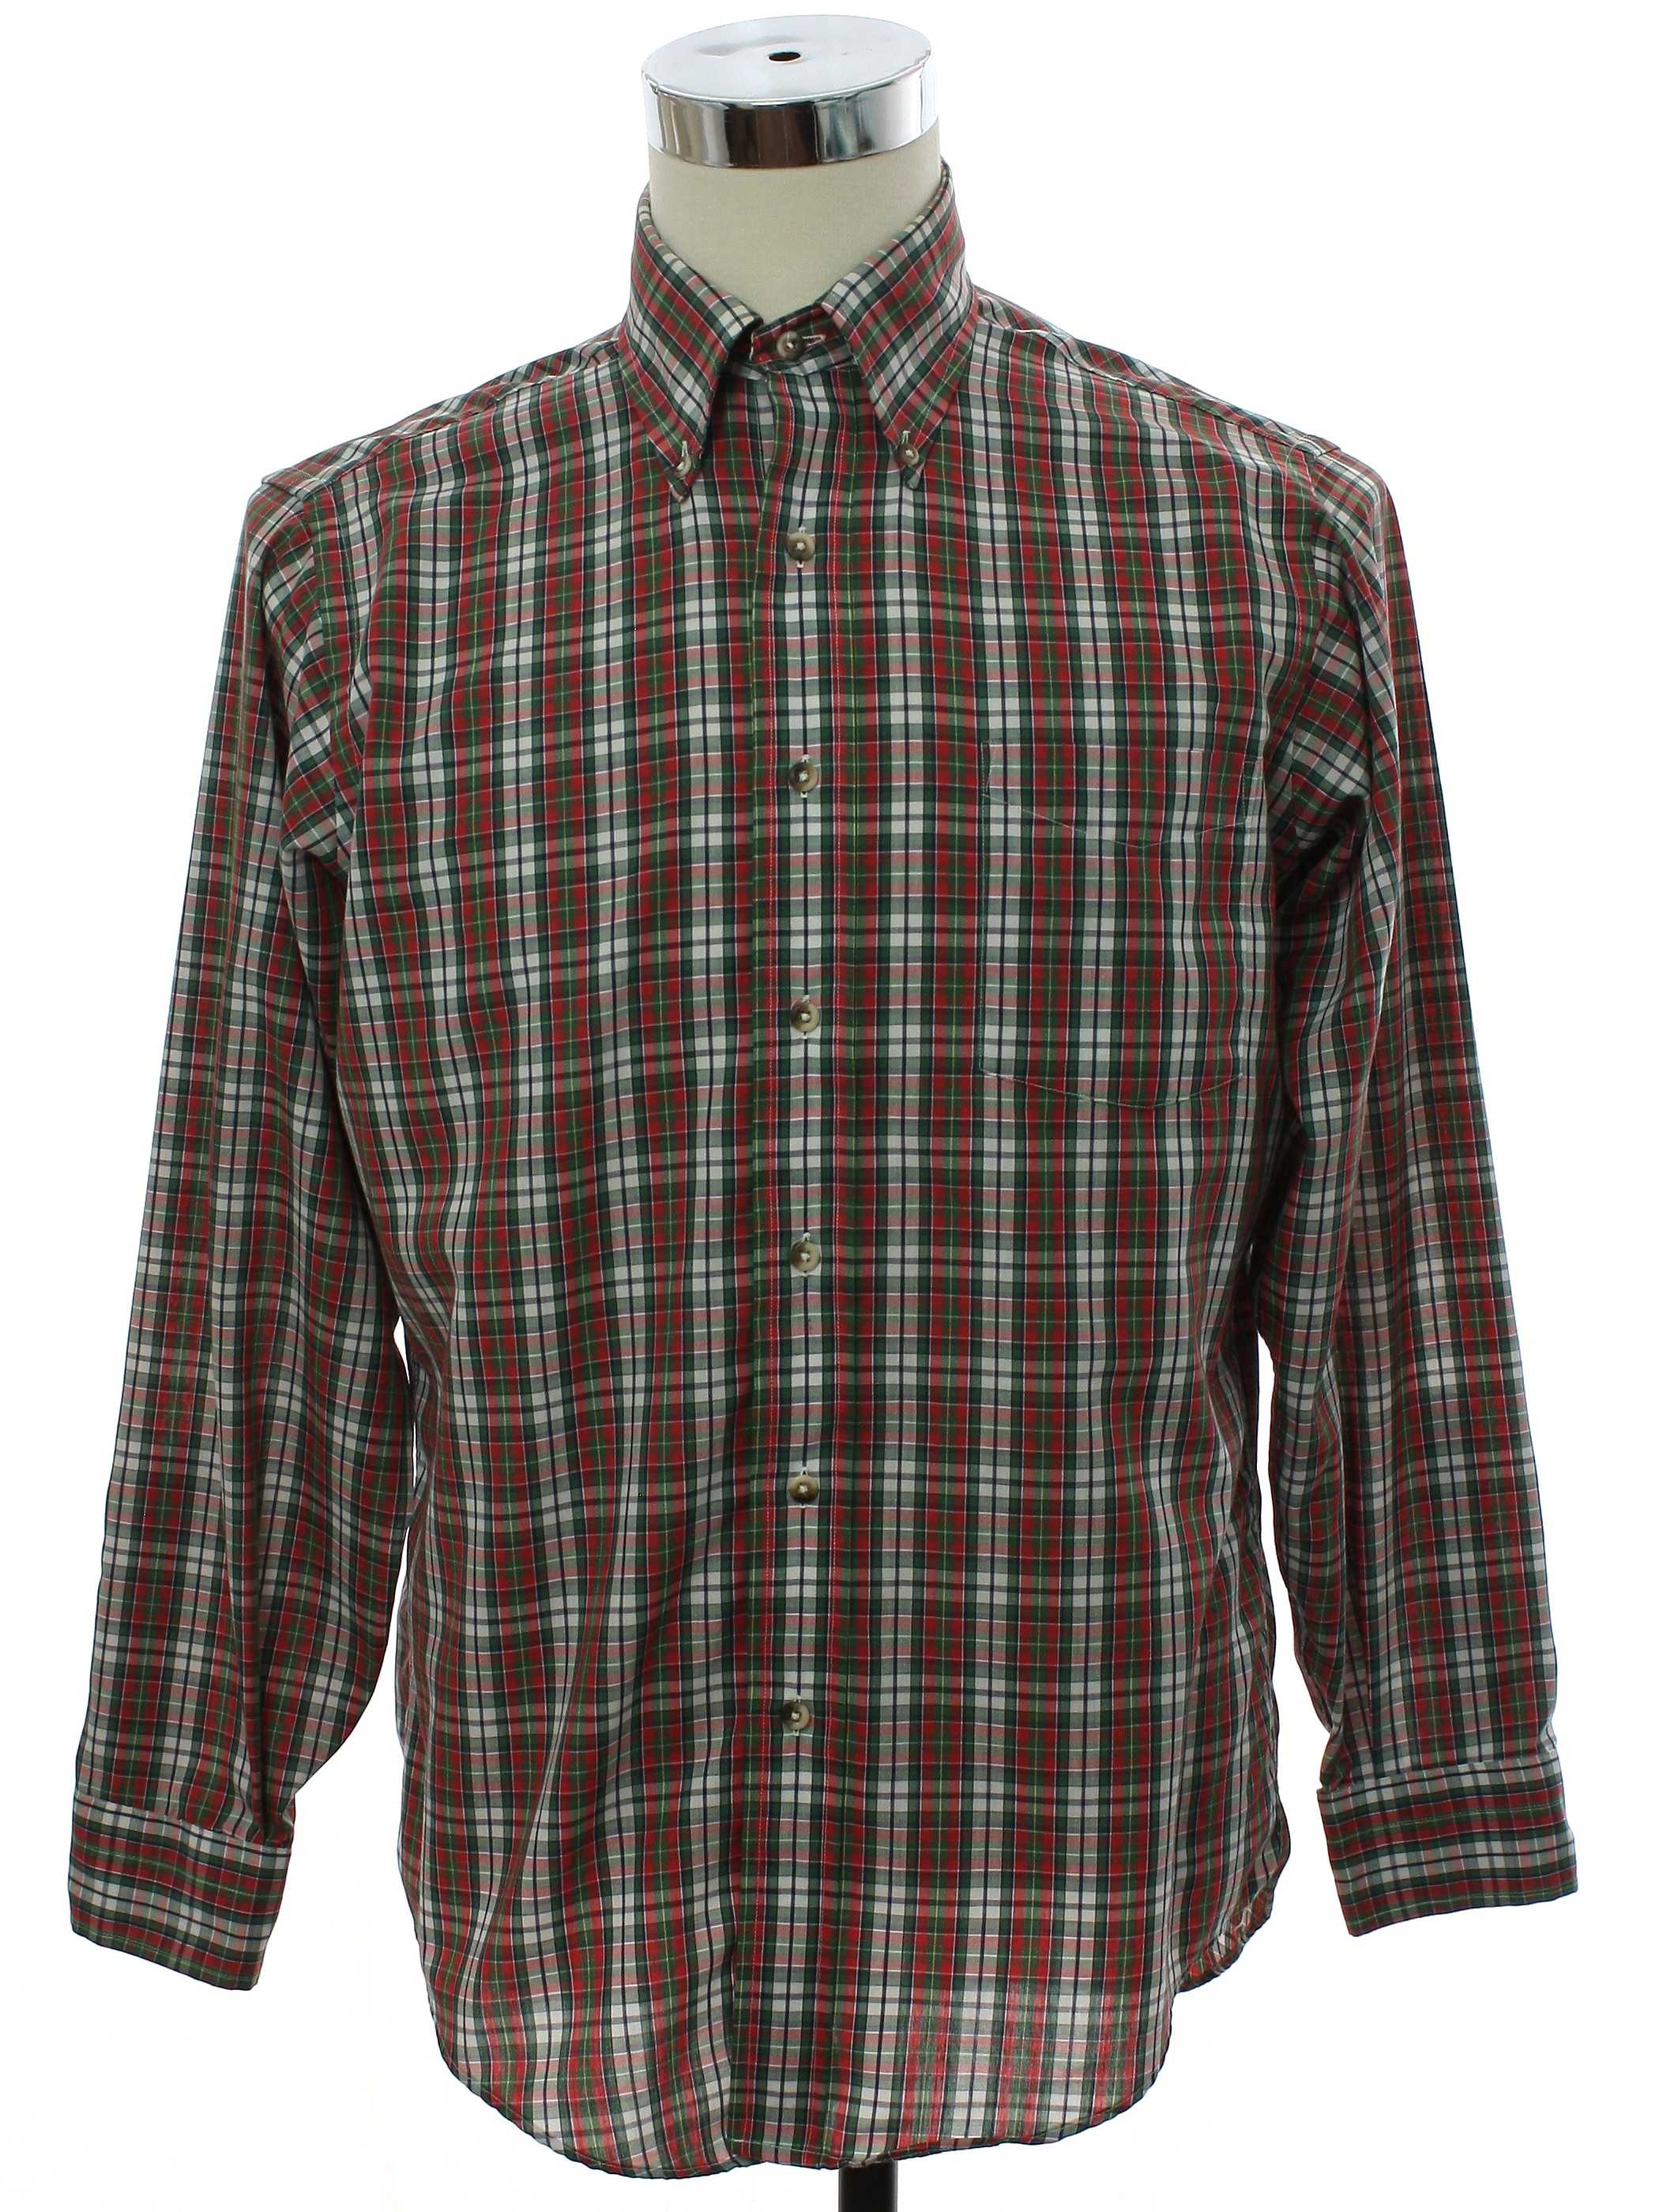 80s Retro Shirt: 80s -Nordstrom- Mens red, white, navy, and green plaid ...